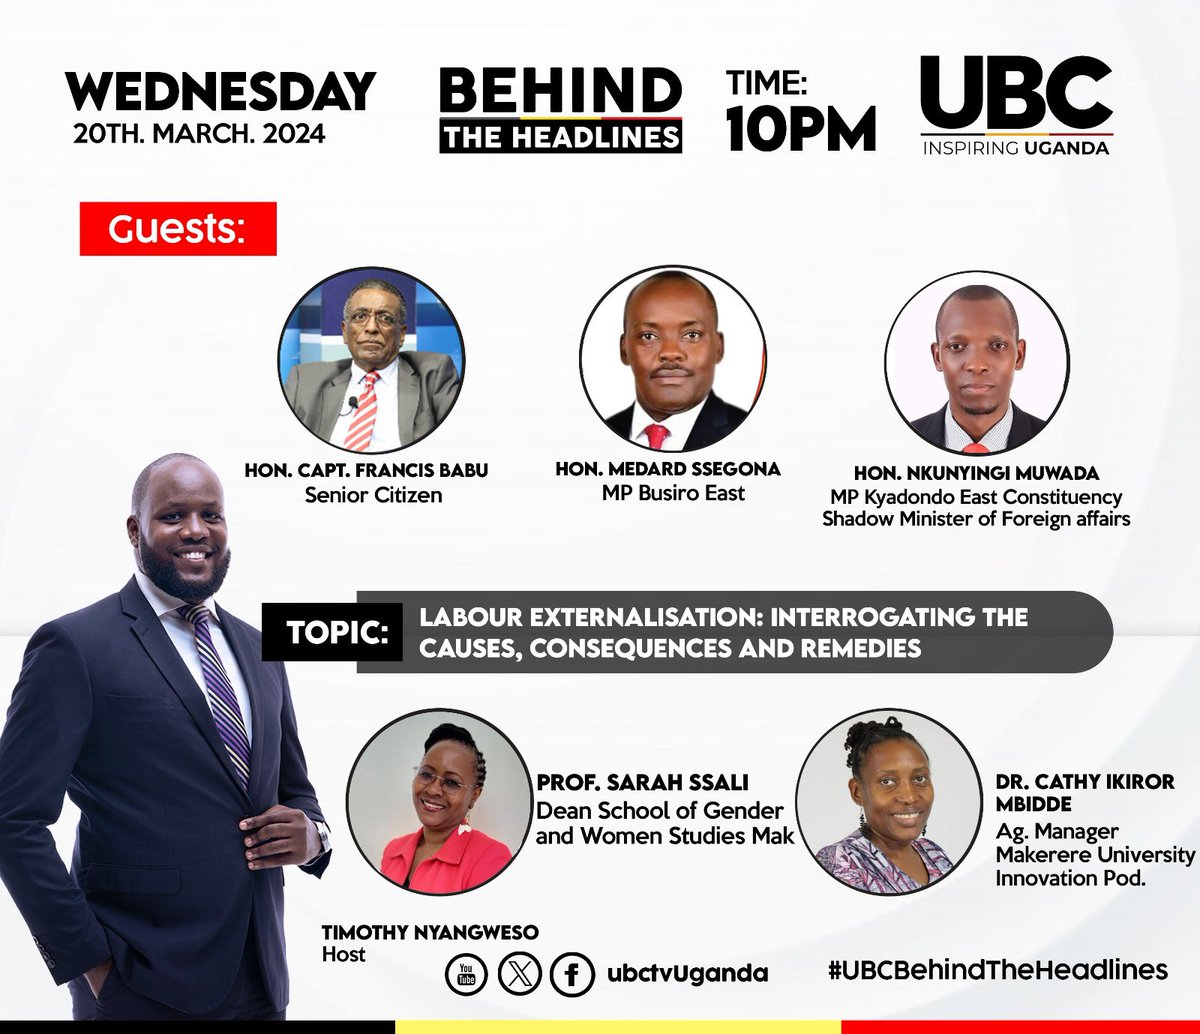 Tonight on @ubctvuganda at 10pm. Can (Bilateral agreements or MOUs) end the plight of externalization of labor? This is the panel @SsaliSarah, @MSseggona @NkunyingiMuwad1 @babuedward #UBCBehindTheHeadlines